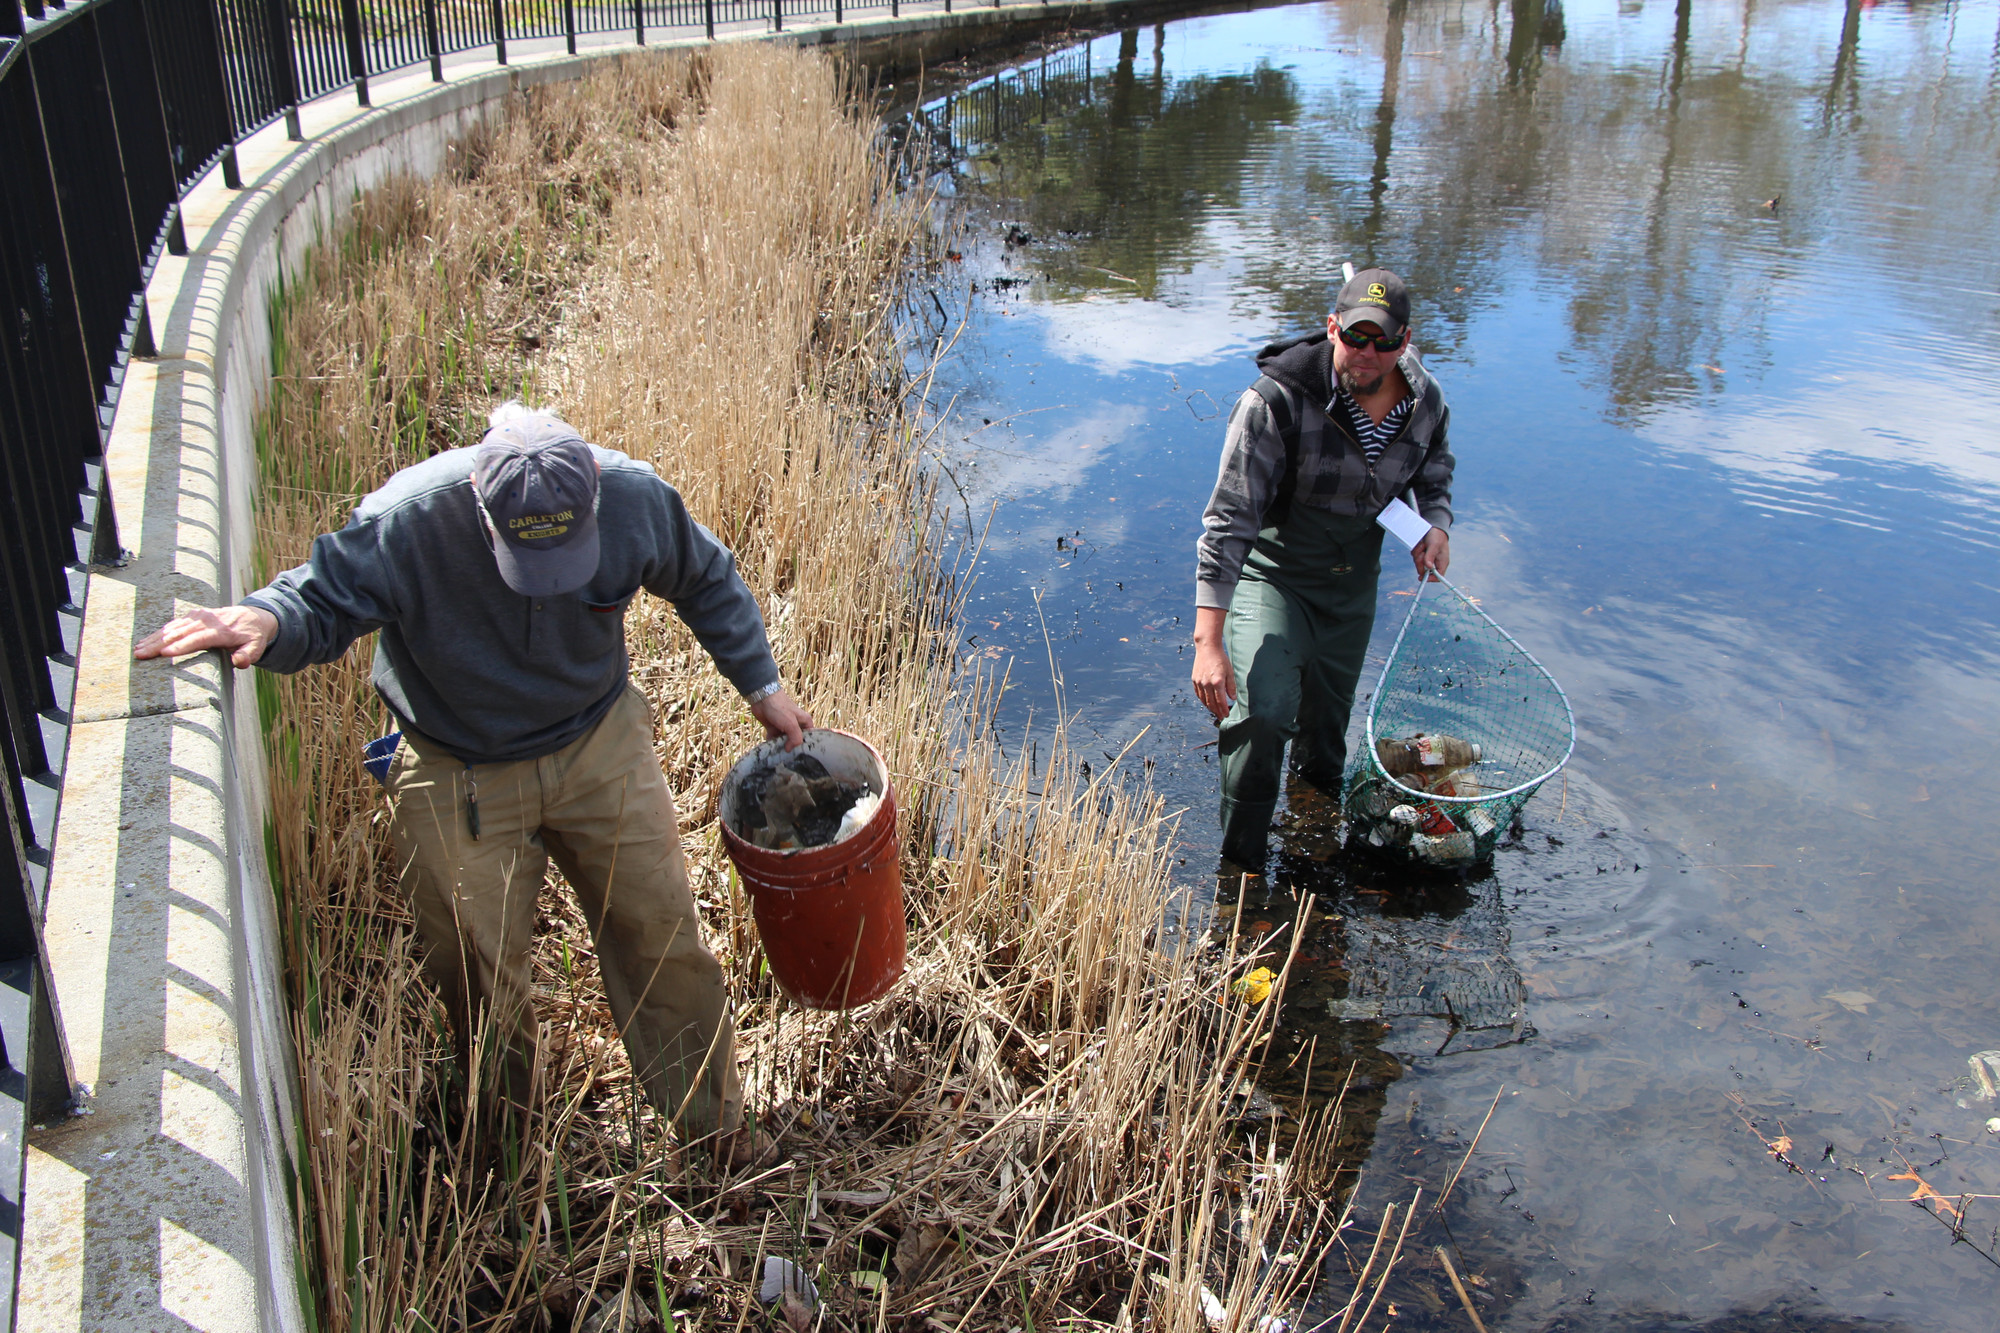 Erik Mahler, right, and Tom Bertock got into Silver Lake to pull out debris, plastic bottles, papers and other litter as part of Baldwin’s Earth Day Cleanup on April 26 at Sliver Lake and Milburn Pond parks.